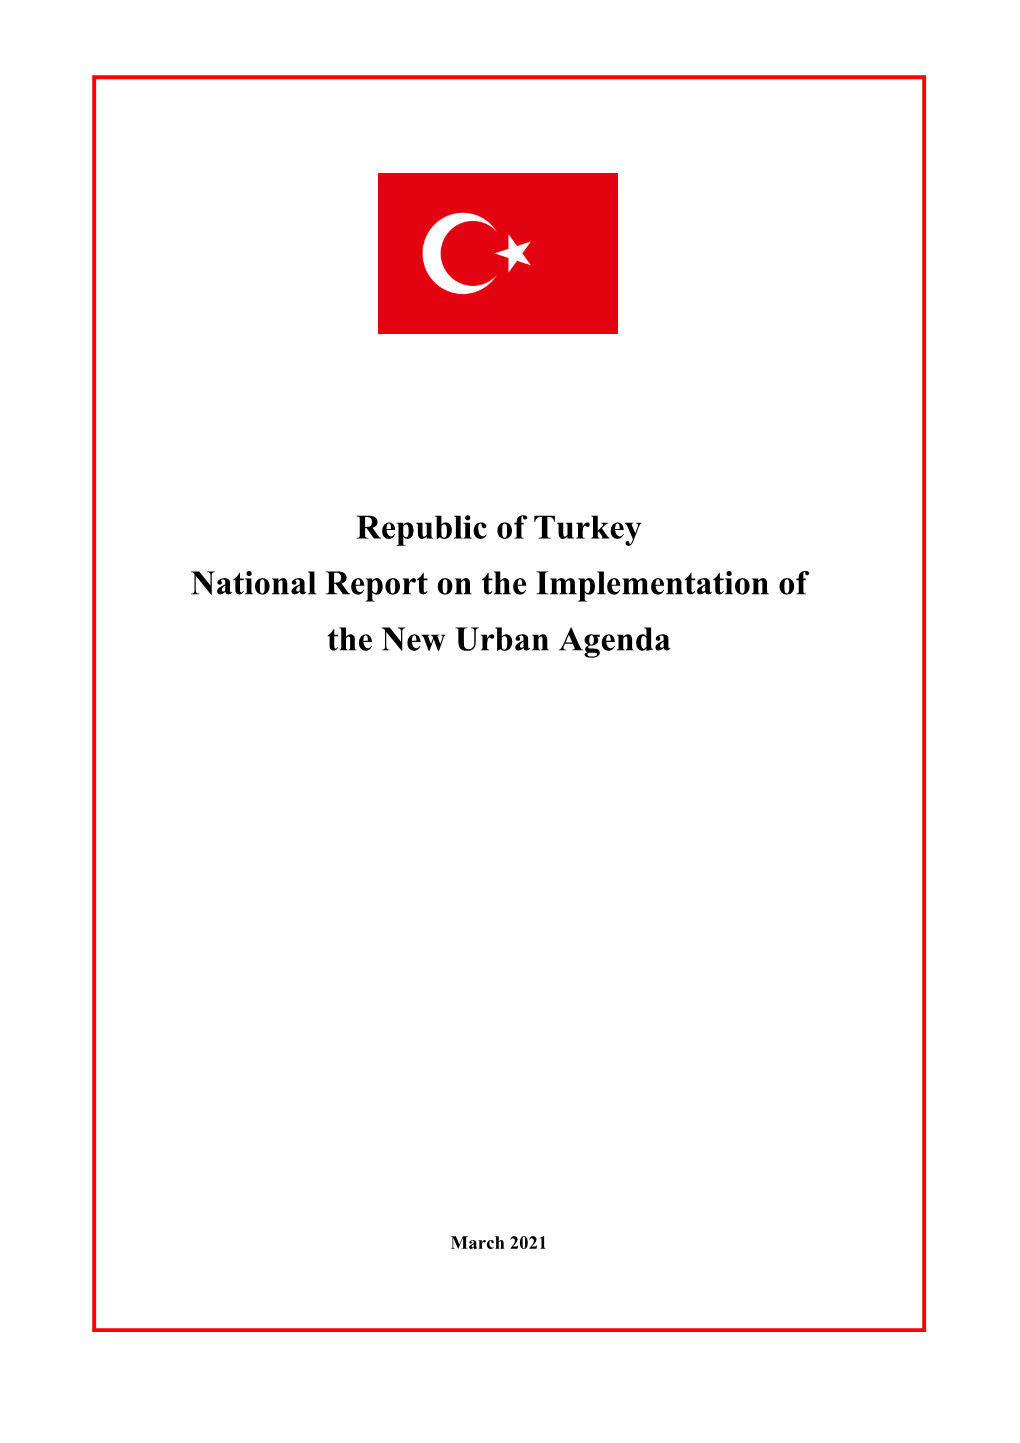 Republic of Turkey National Report on the Implementation of the New Urban Agenda